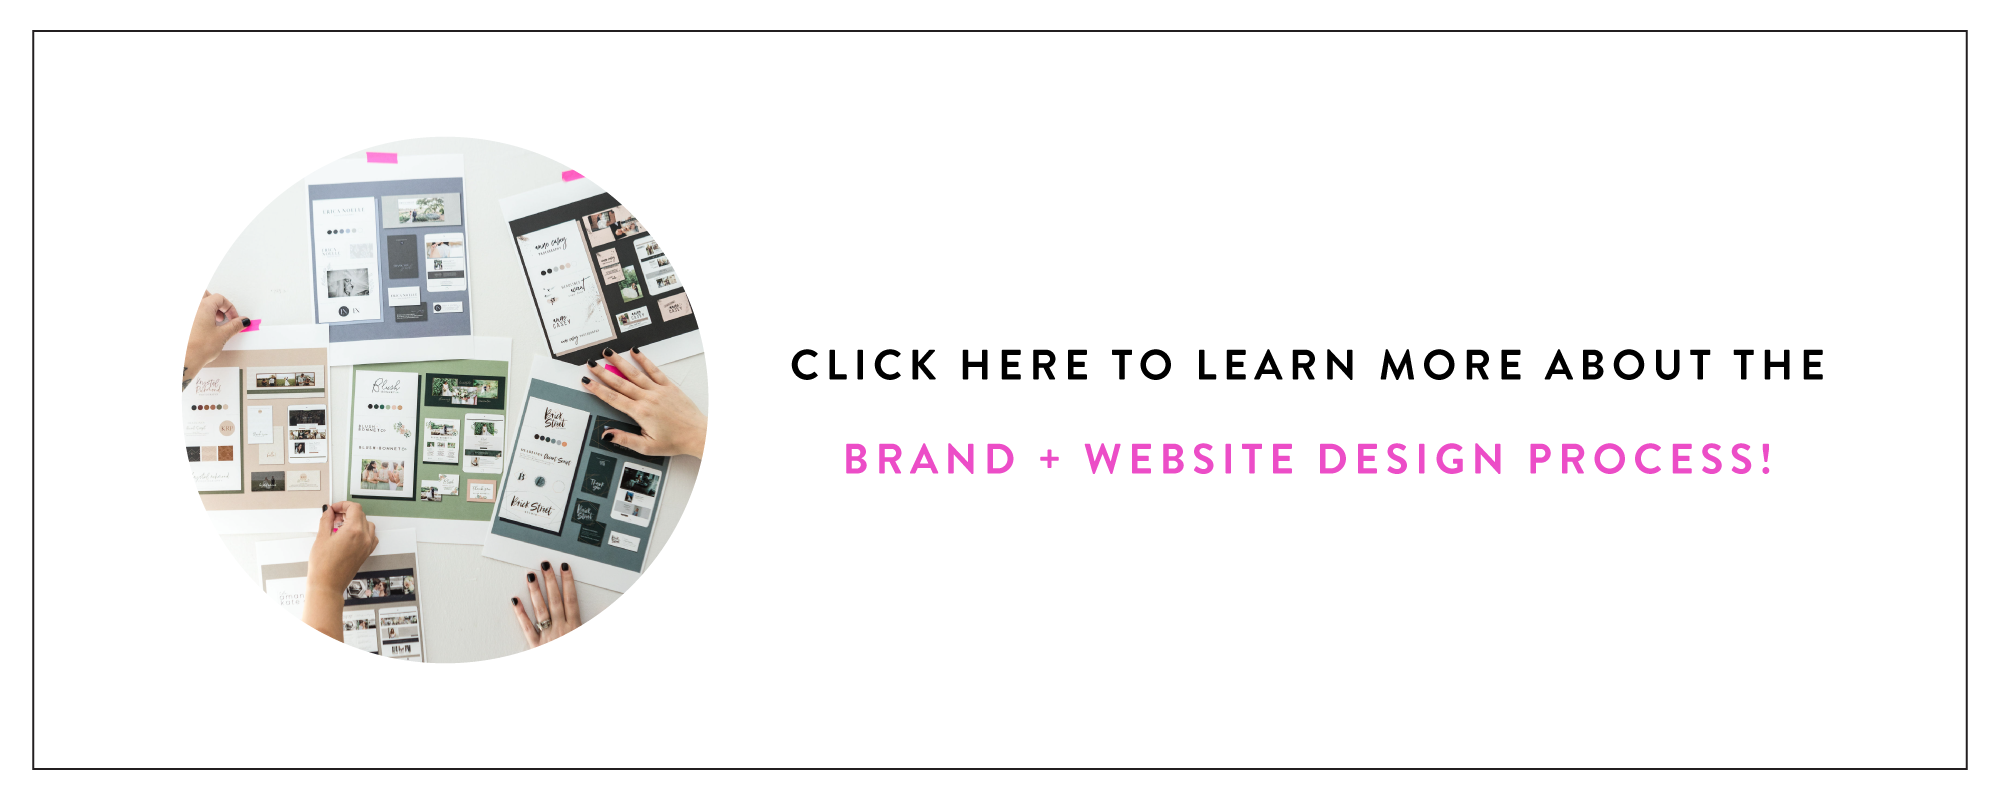 Click here to learn more about the brand and website design process!